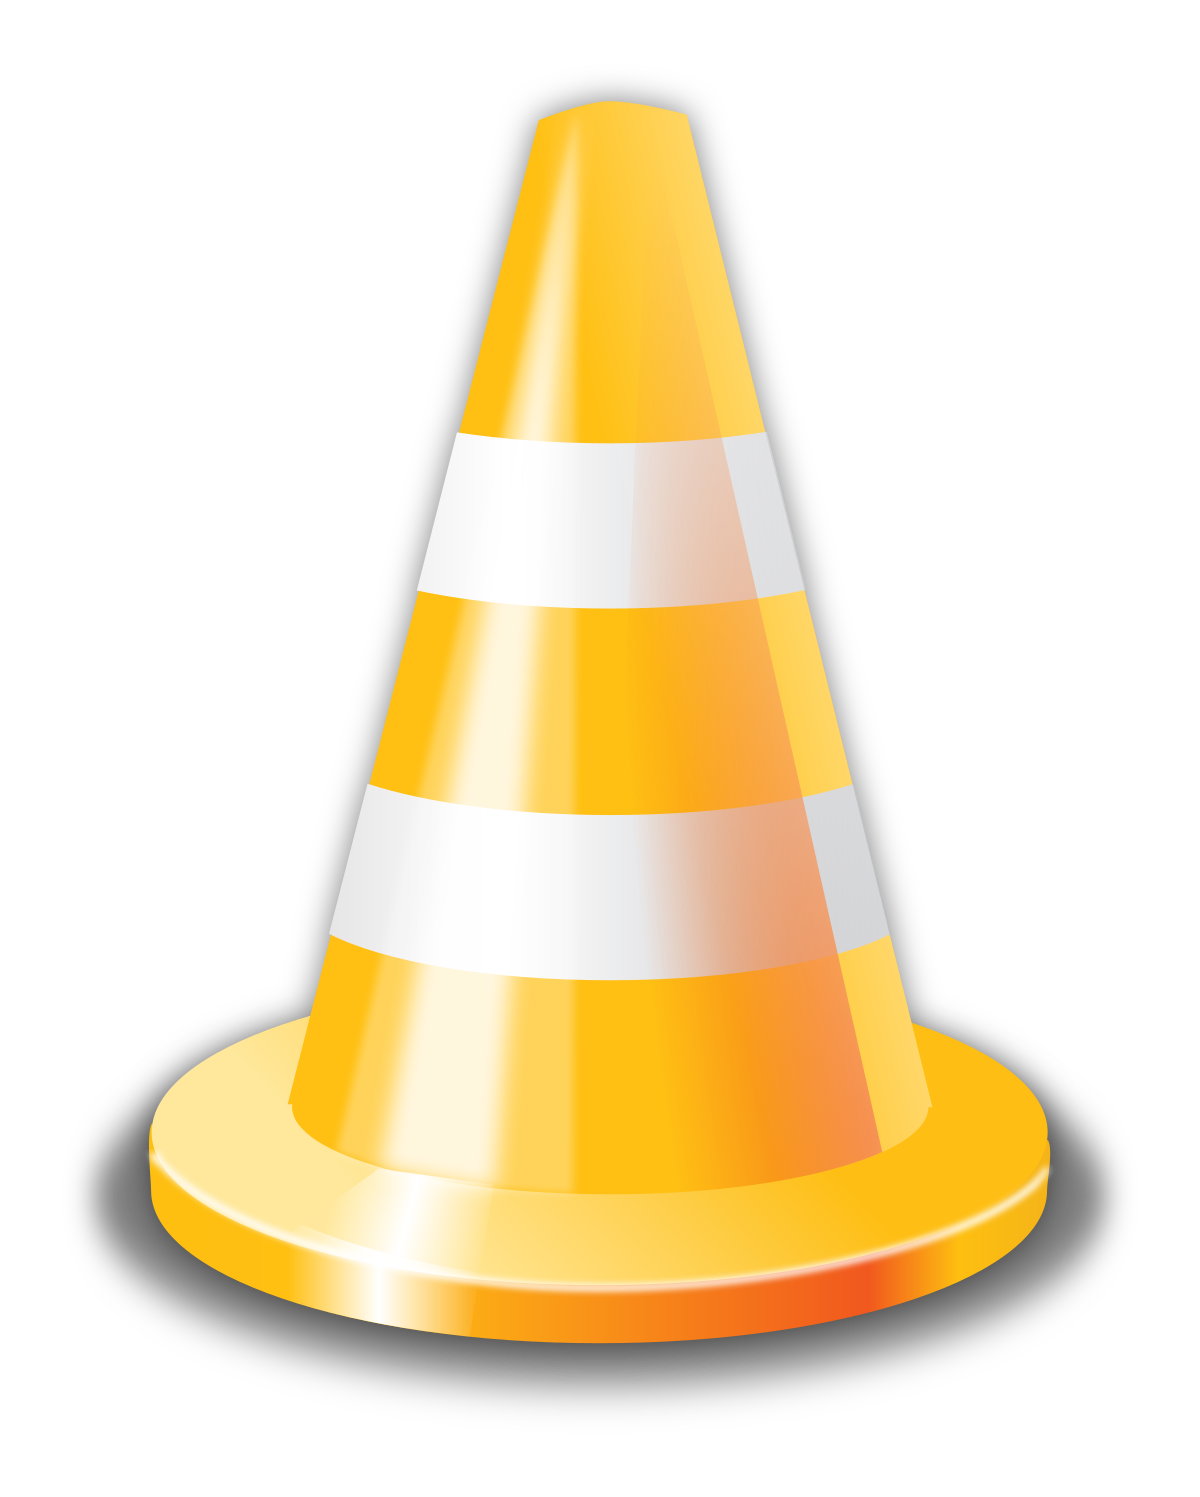 Download File:Traffic cone.svg - Wikimedia Commons